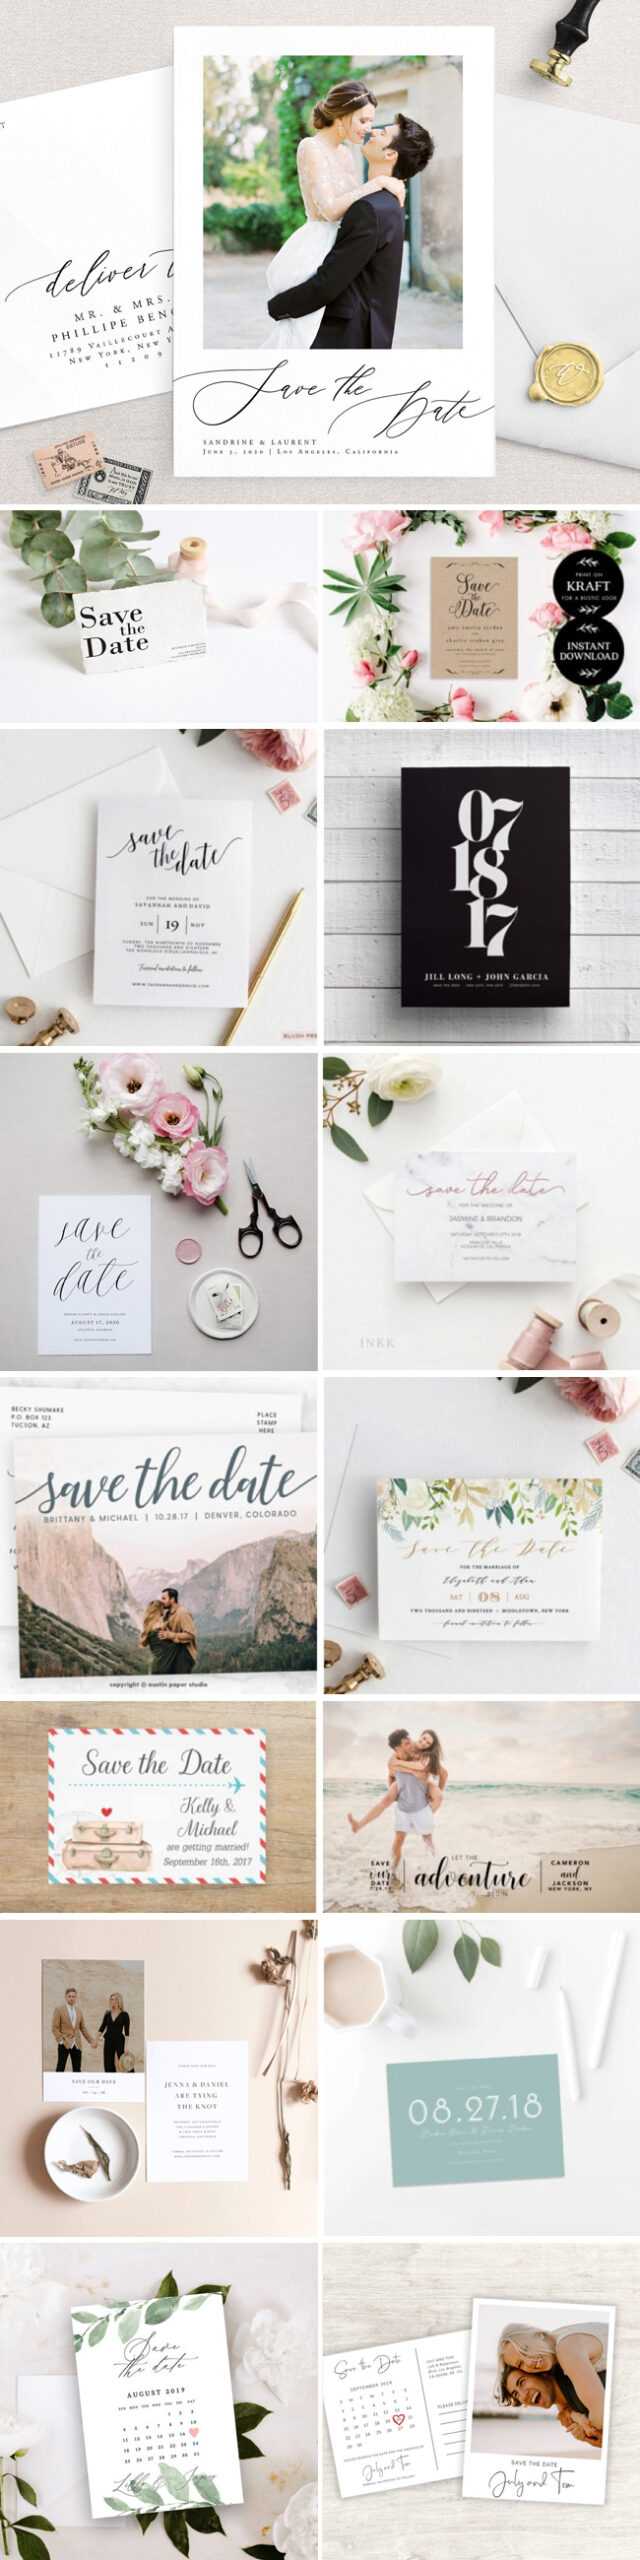 15 Free Printable Save The Dates | Southbound Bride For Free Save The Date Postcard Templates